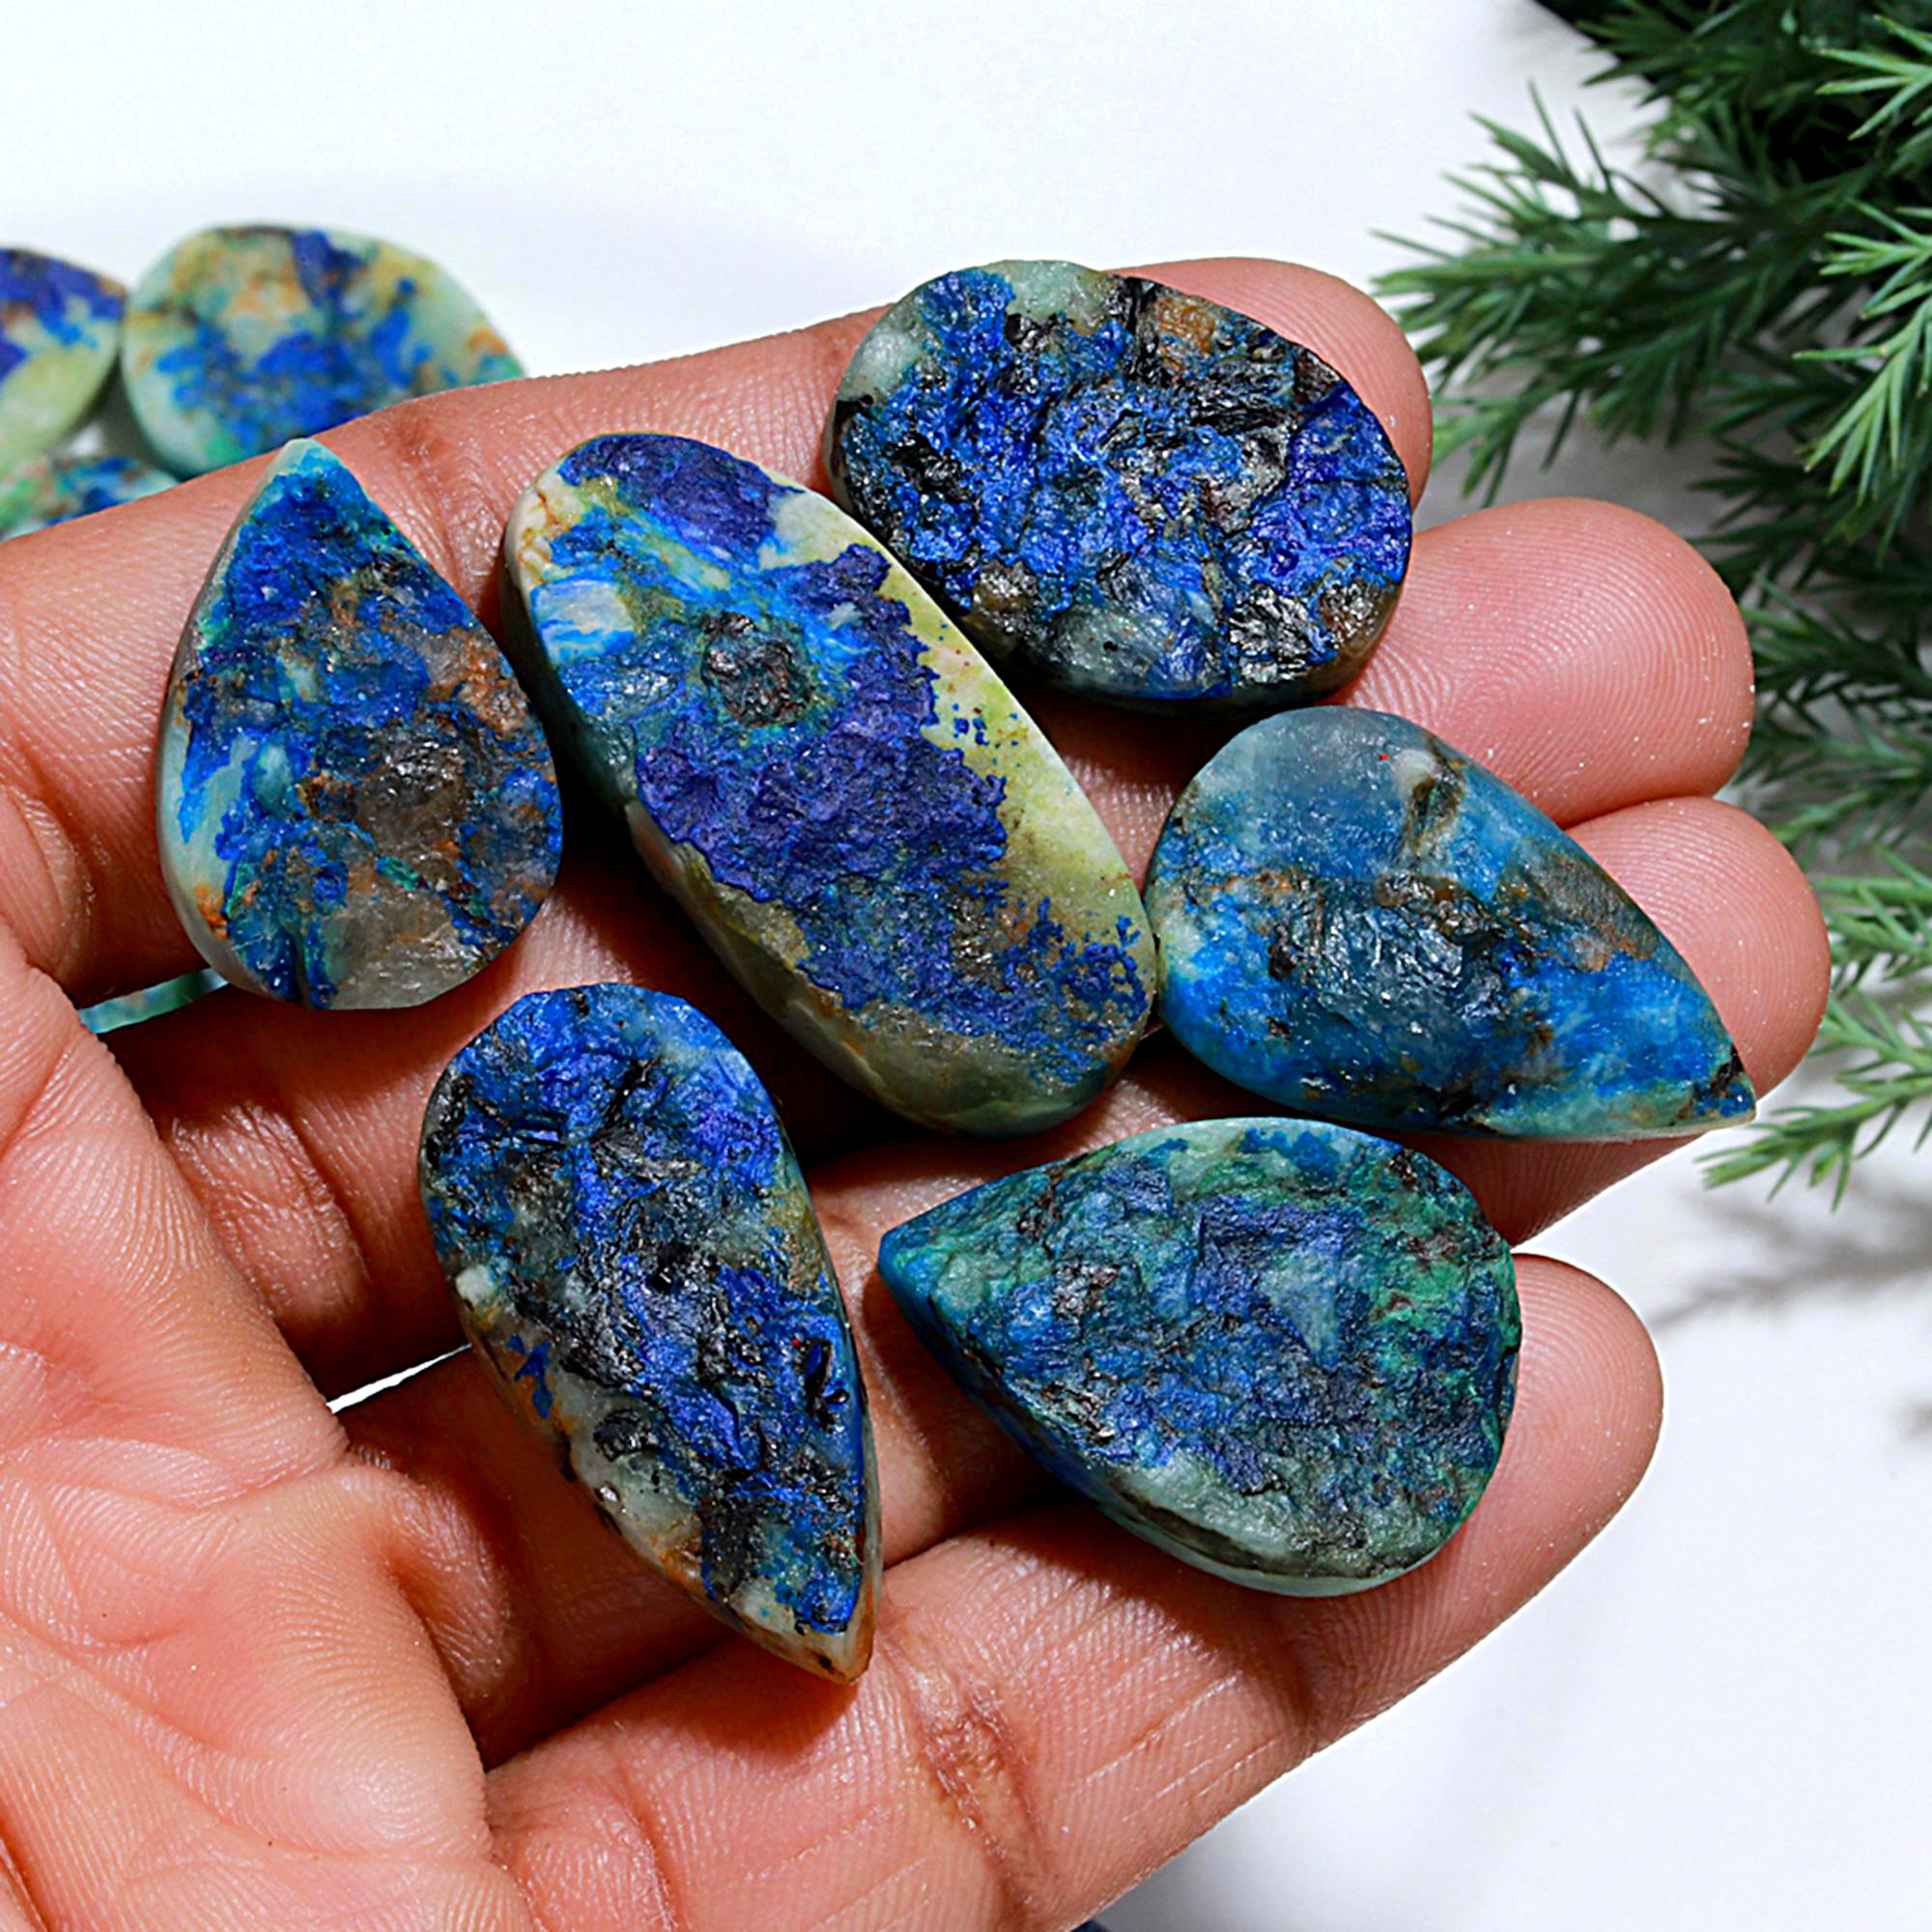 48 Pcs 735.Cts Natural Azurite Druzy Unpolished Loose Cabochon Gemstone For Jewelry Wholesale Lot Size 32x15 13x13mm